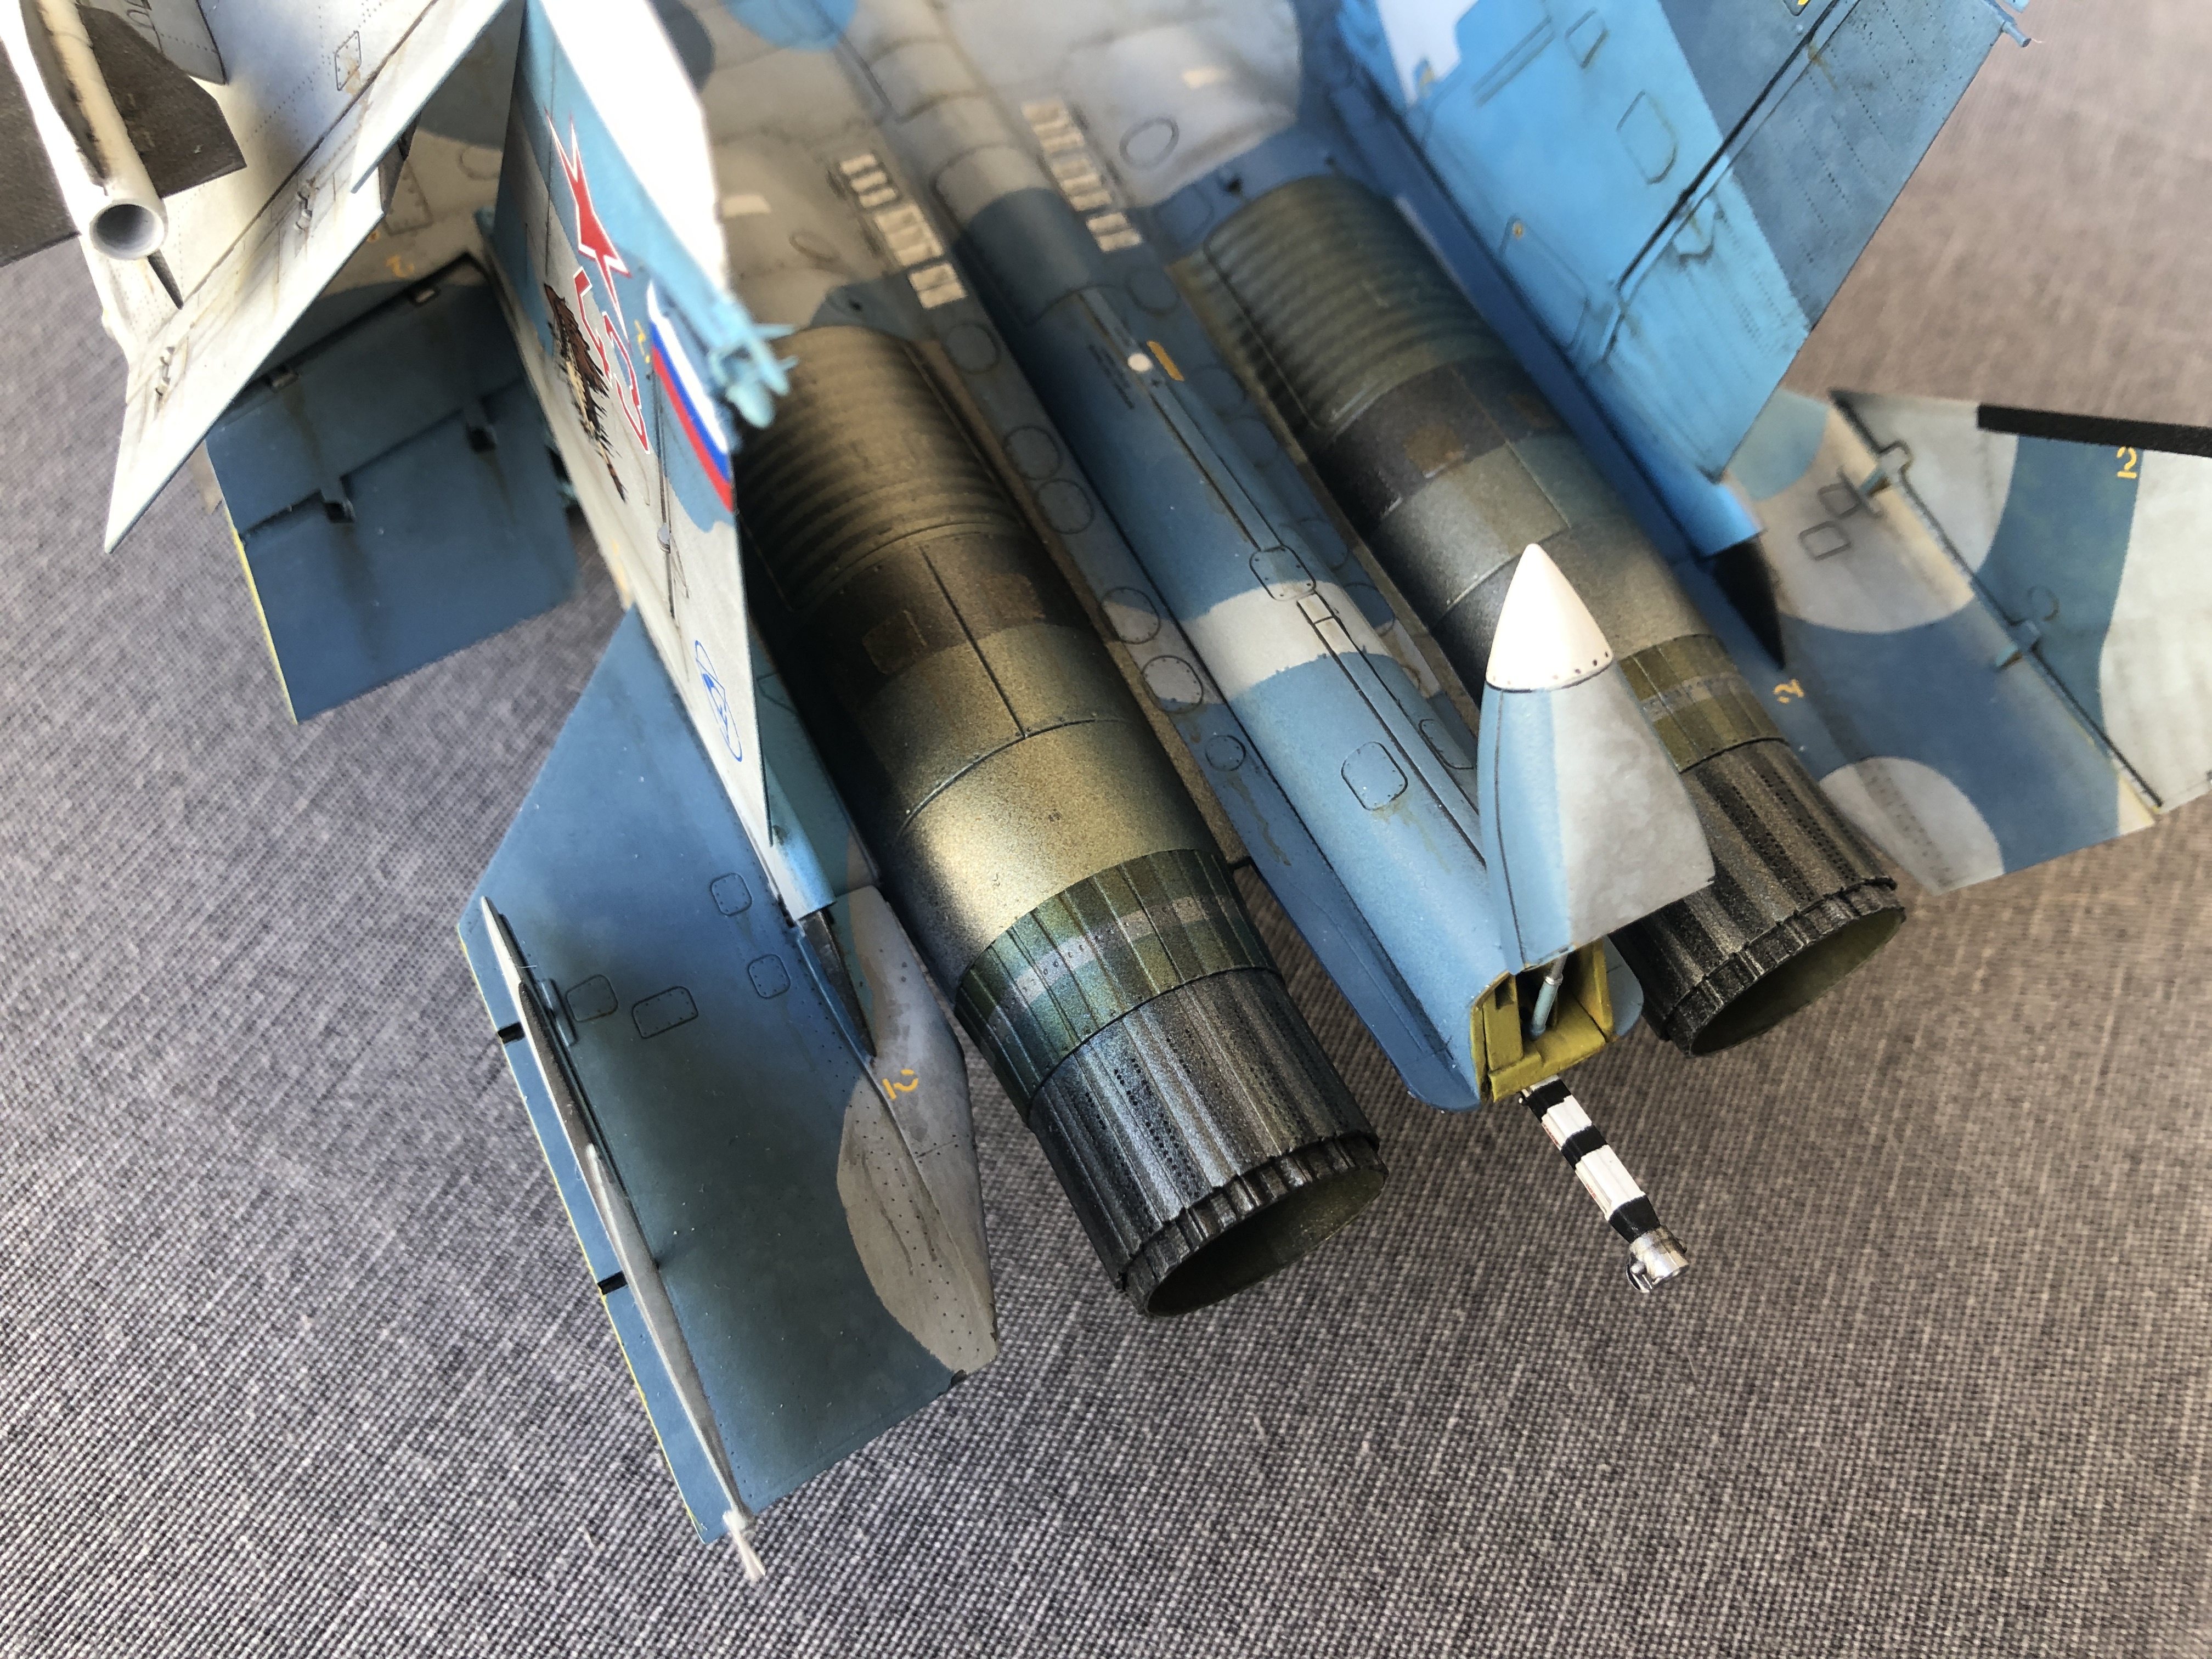 SU-33 Flanker D • Kinetic 1/48 Aqr1